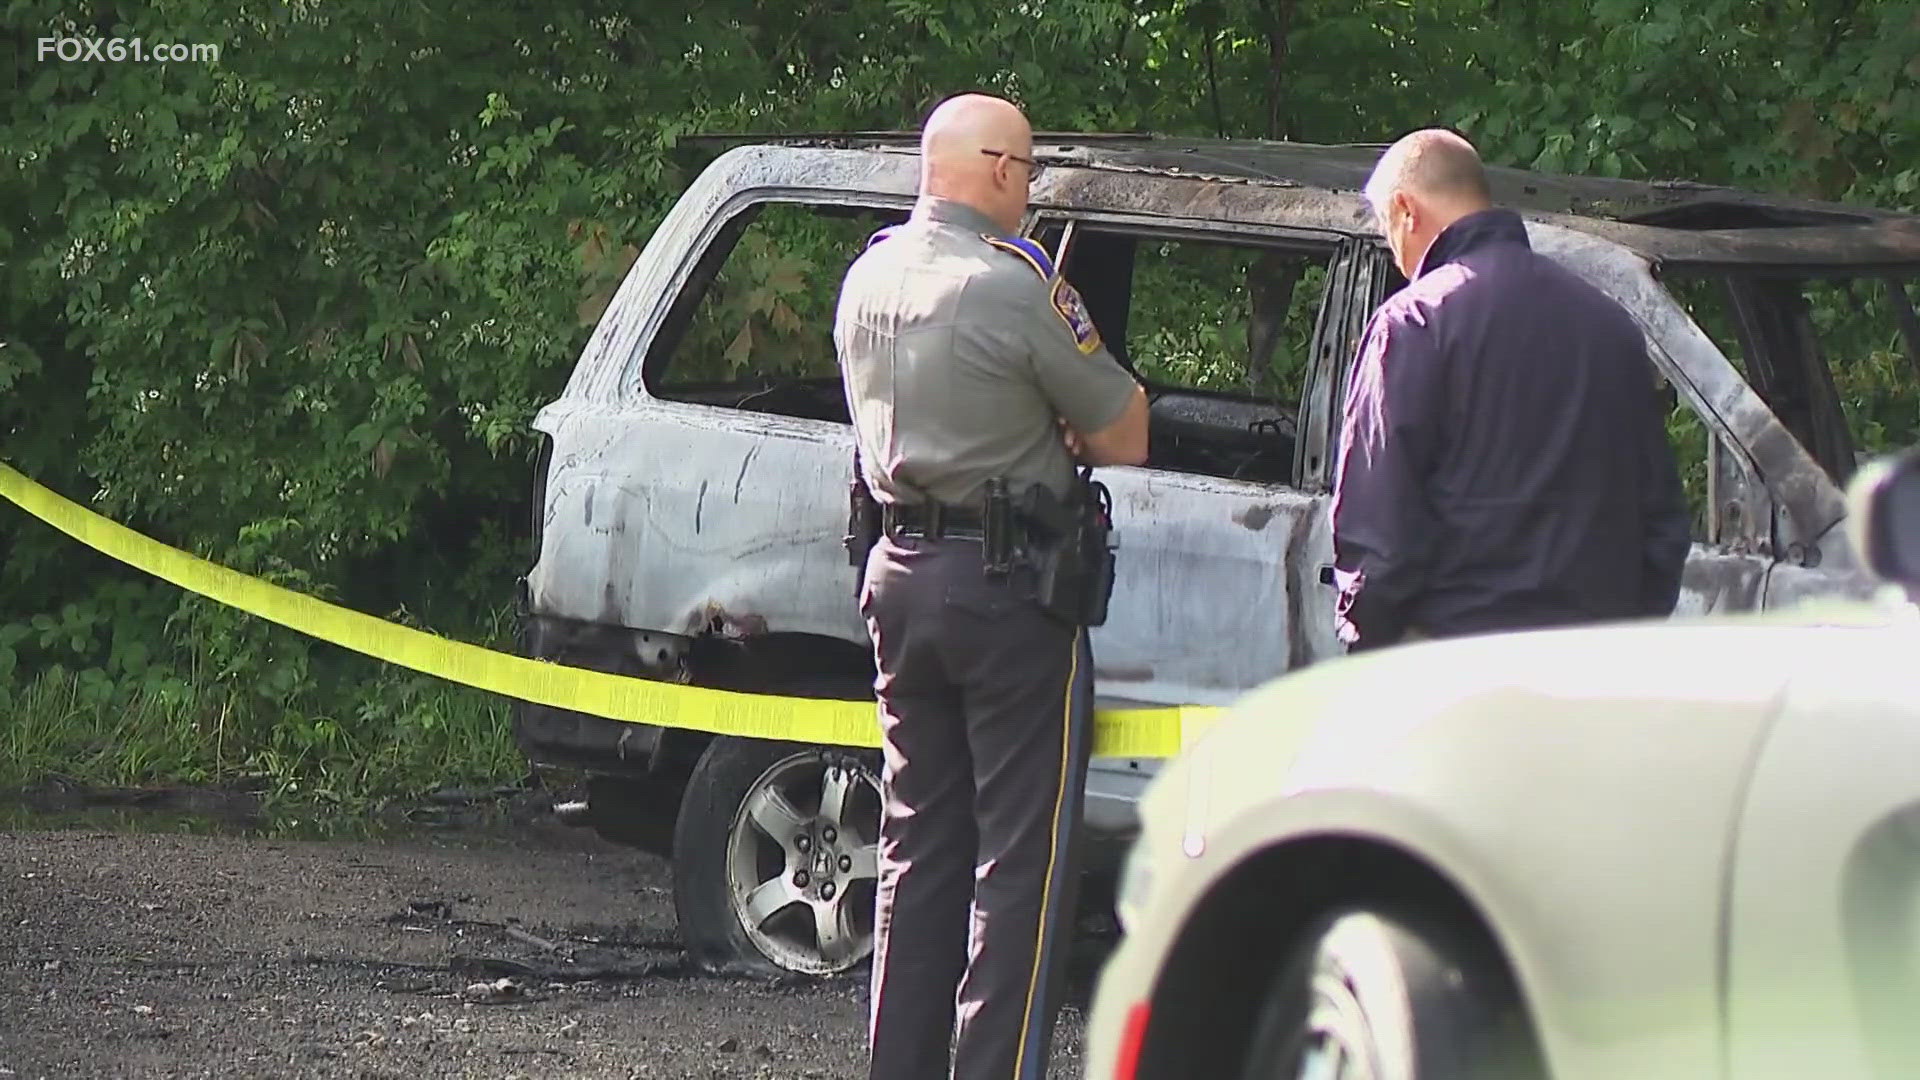 State police say two people were found dead in a burning car in Oxford early Thursday morning on Roosevelt Drive along Route 34.